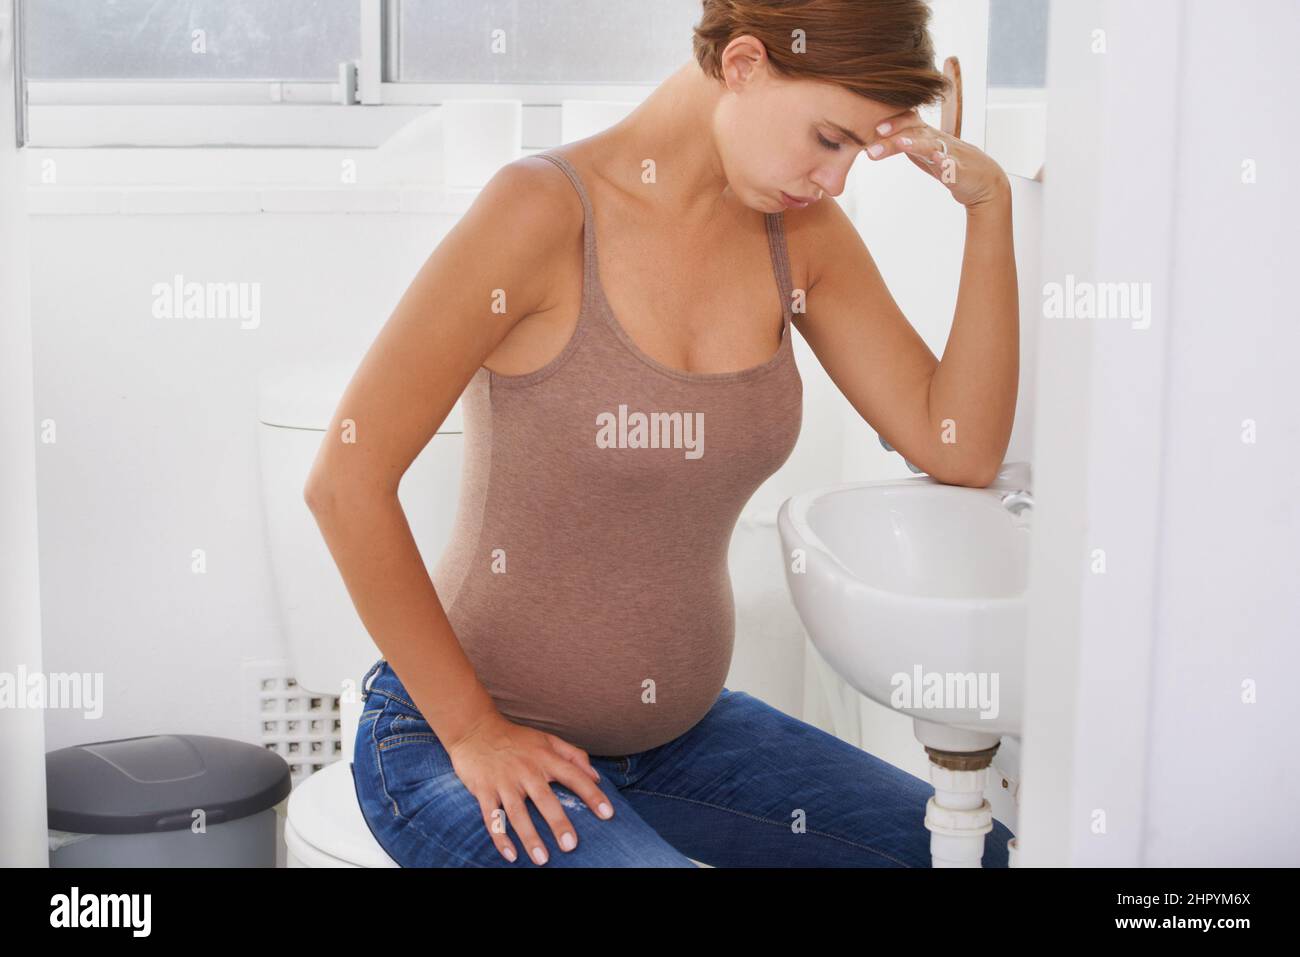 Riding waves of nausea. A pregnant woman struggling with morning sickness in the bathroom. Stock Photo